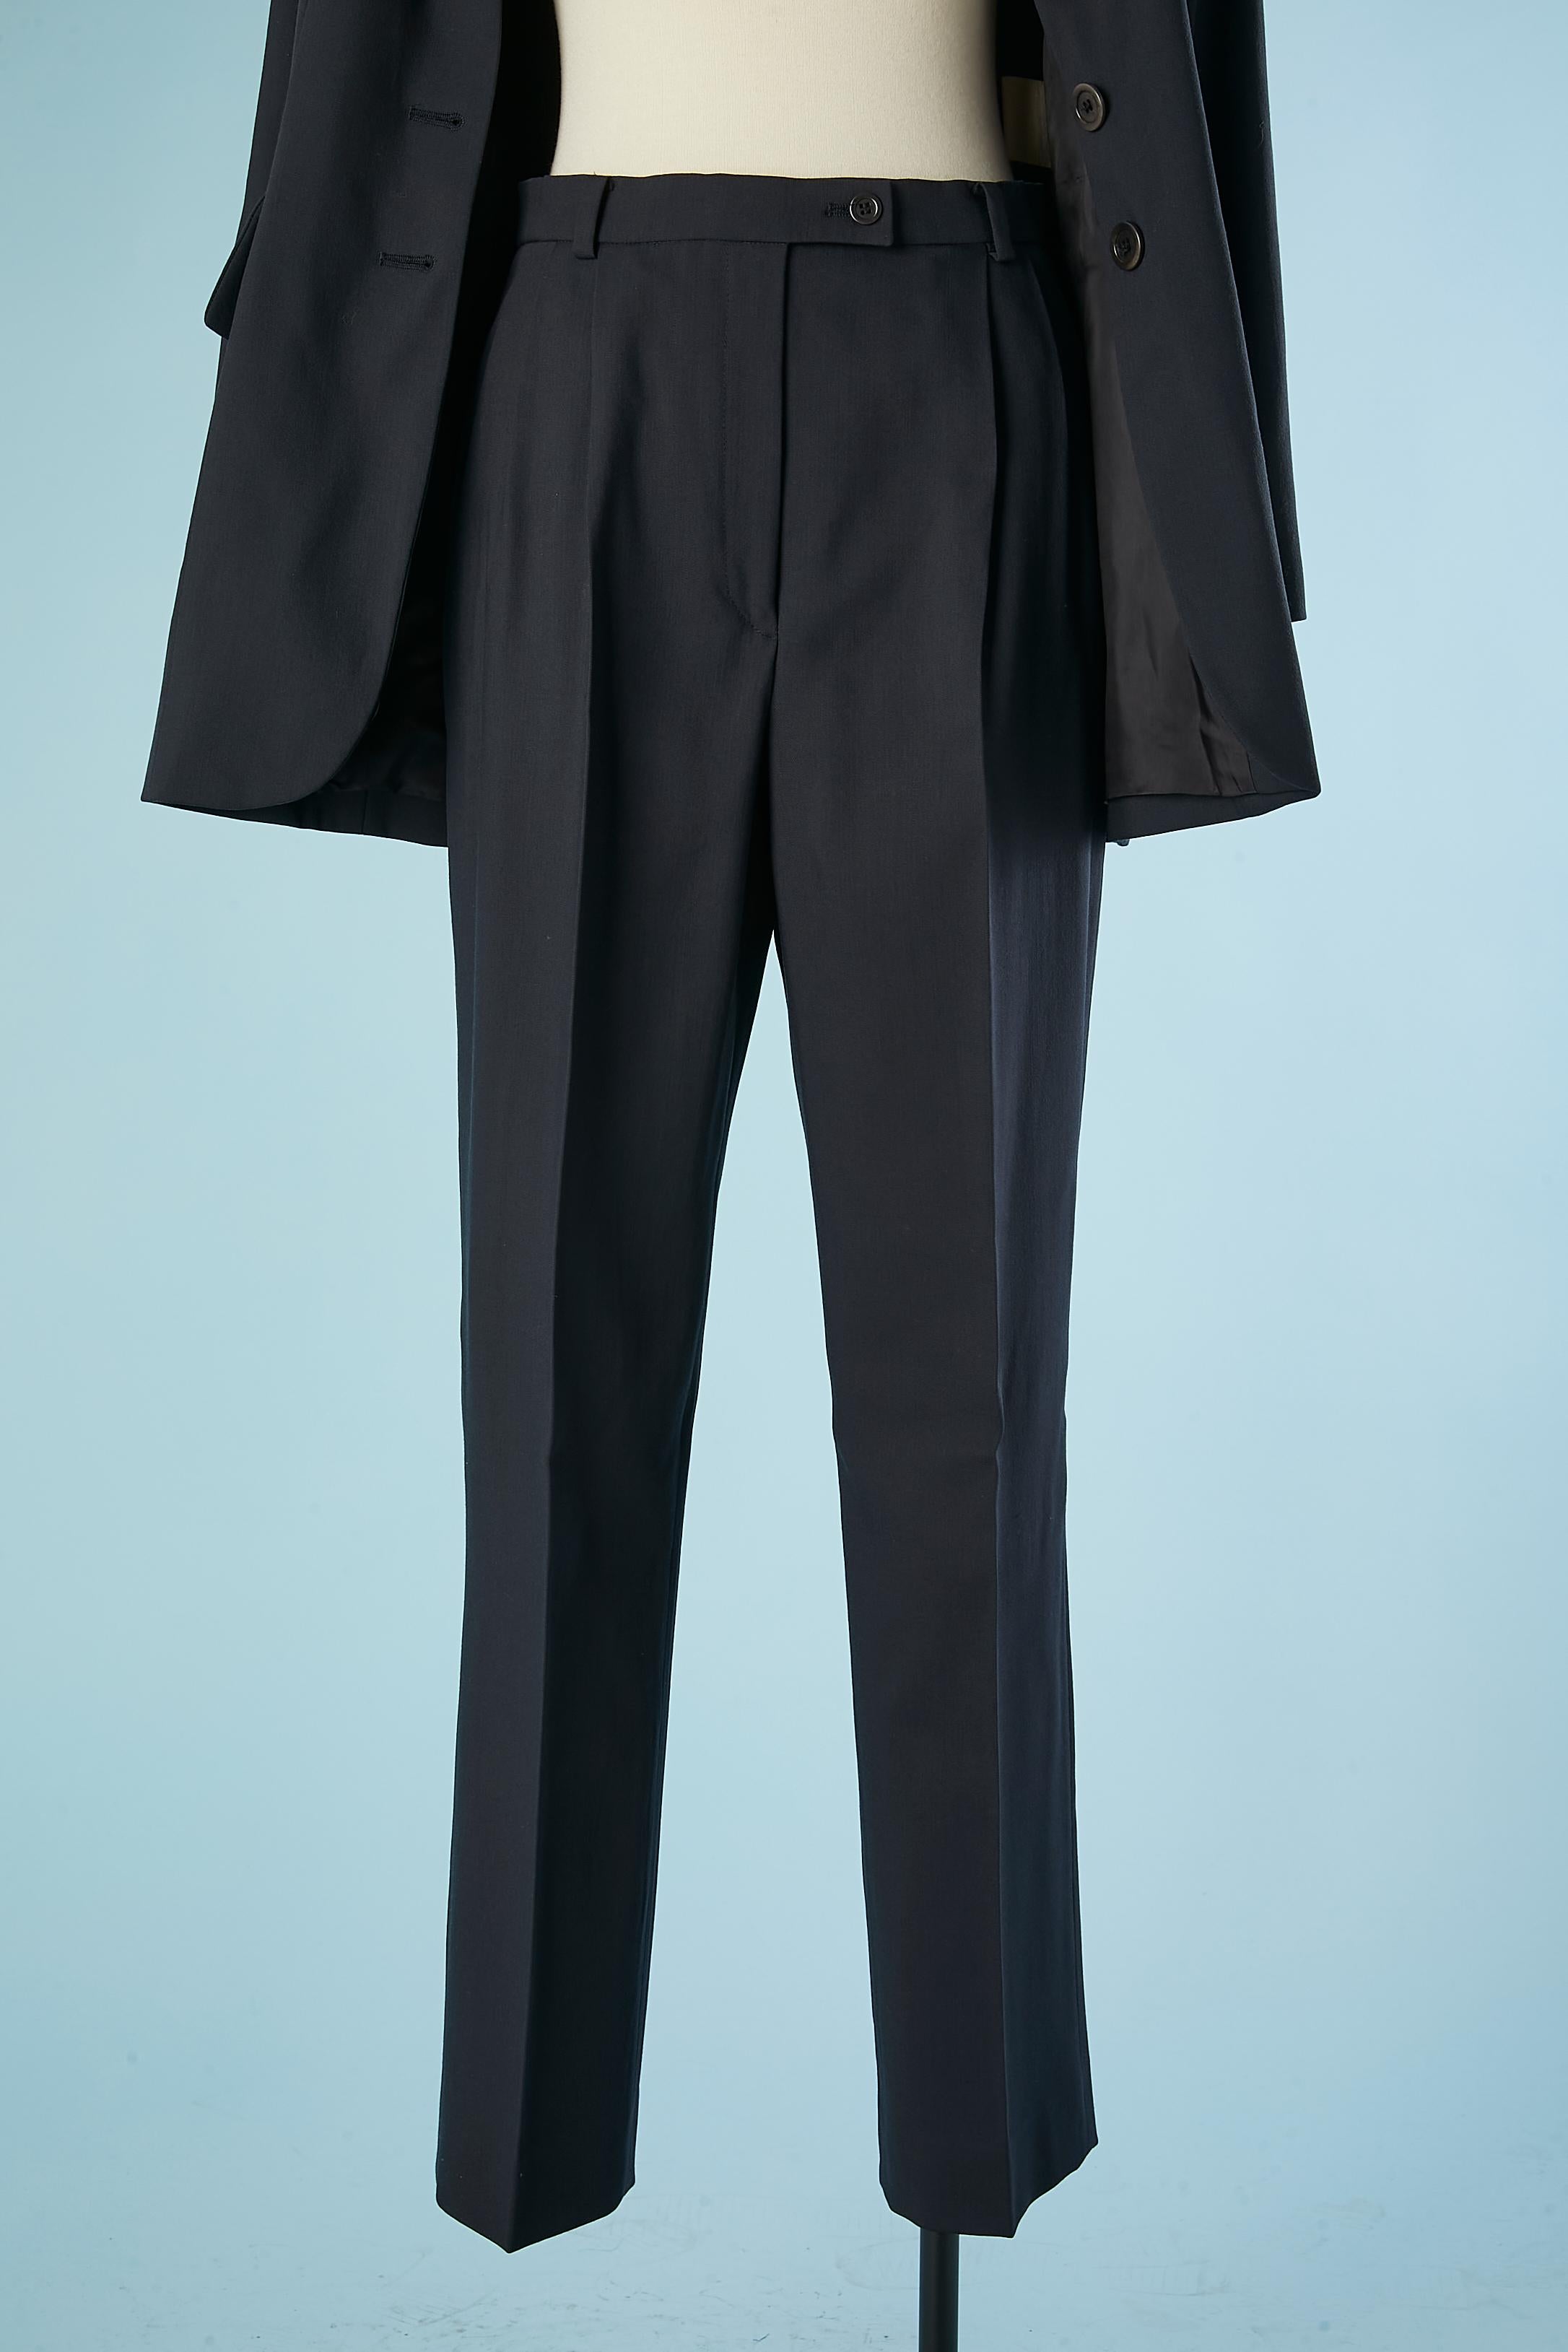 Wool navy blue trouser-suit (and skirt as well) Cerruti 1881 For Sale 1